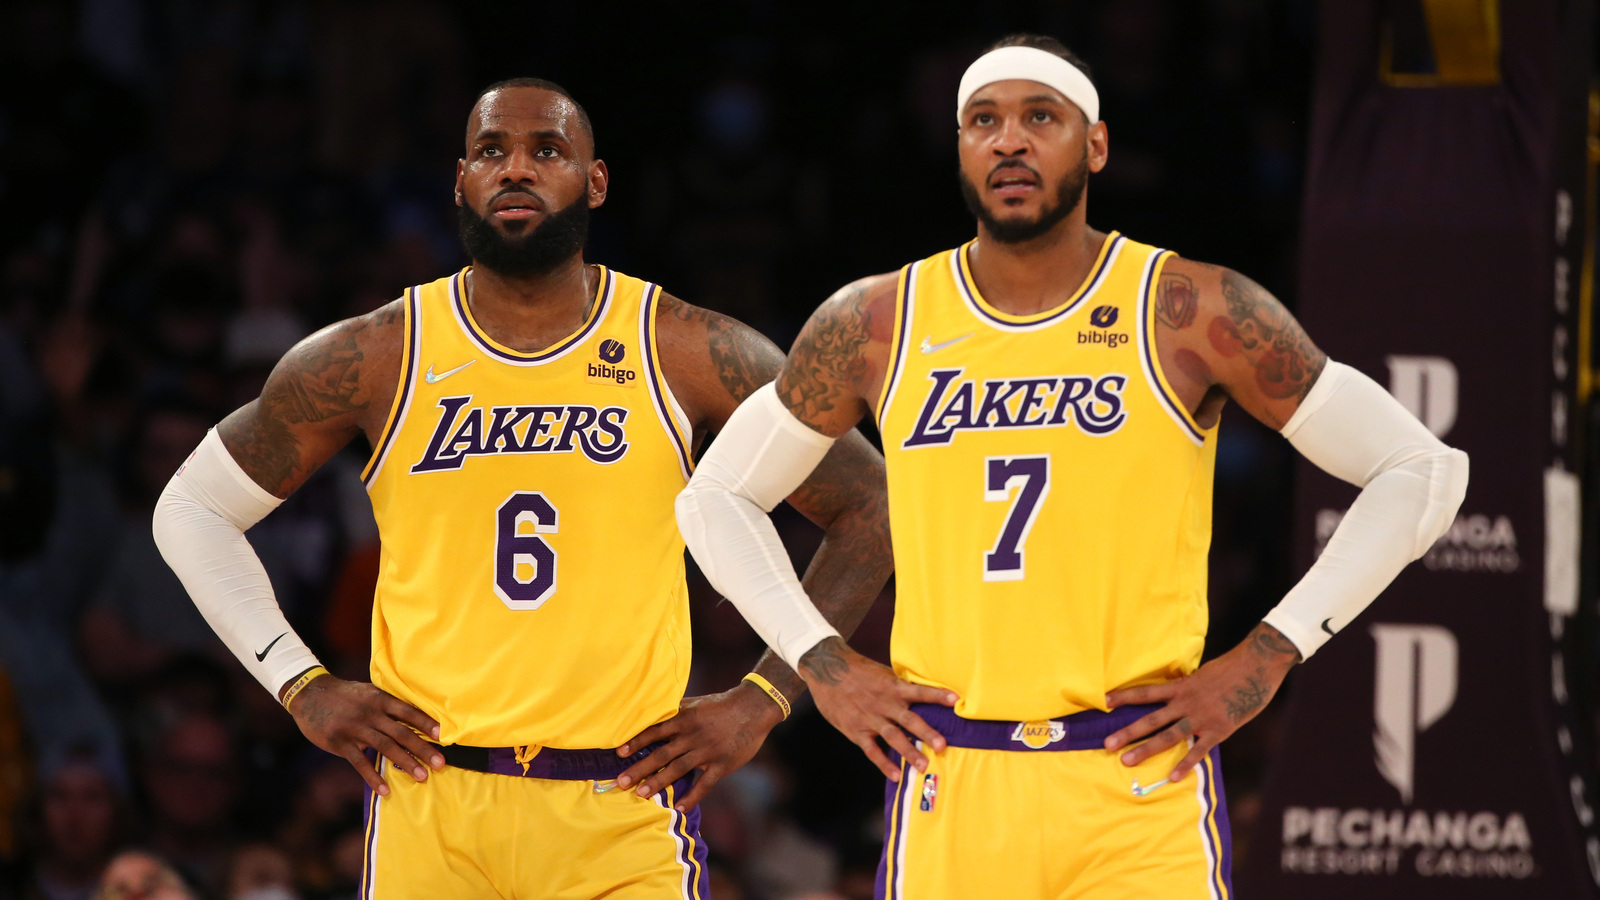 Carmelo Anthony's decision leaves LeBron James as final active player from iconic draft class